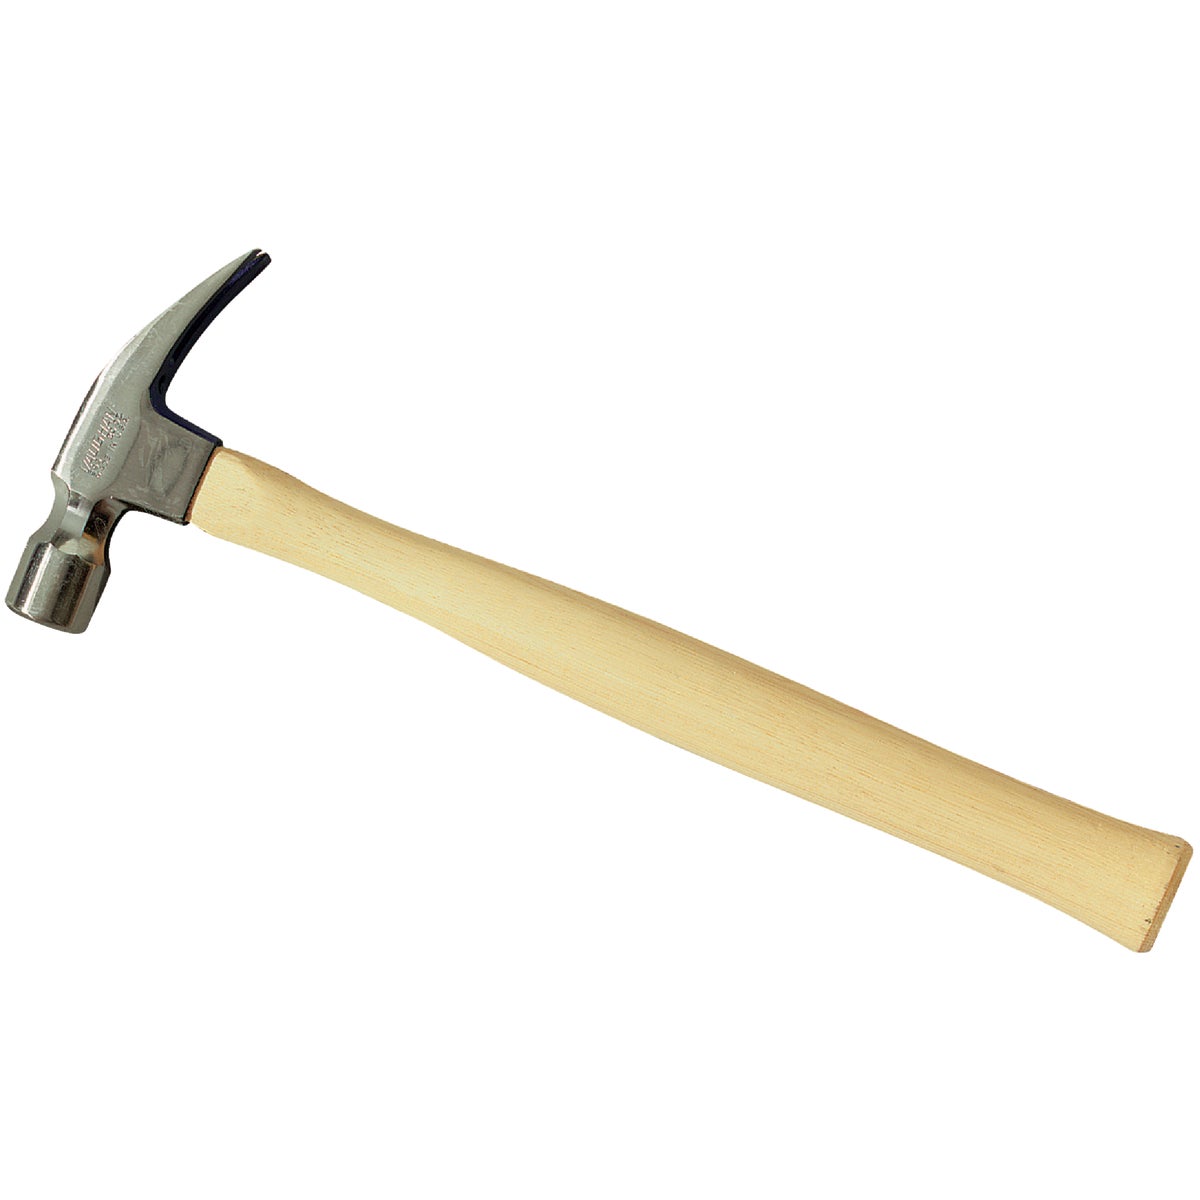 Vaughan 20 Oz. Smooth-Face Framing Hammer with 14 In. Hickory Handle